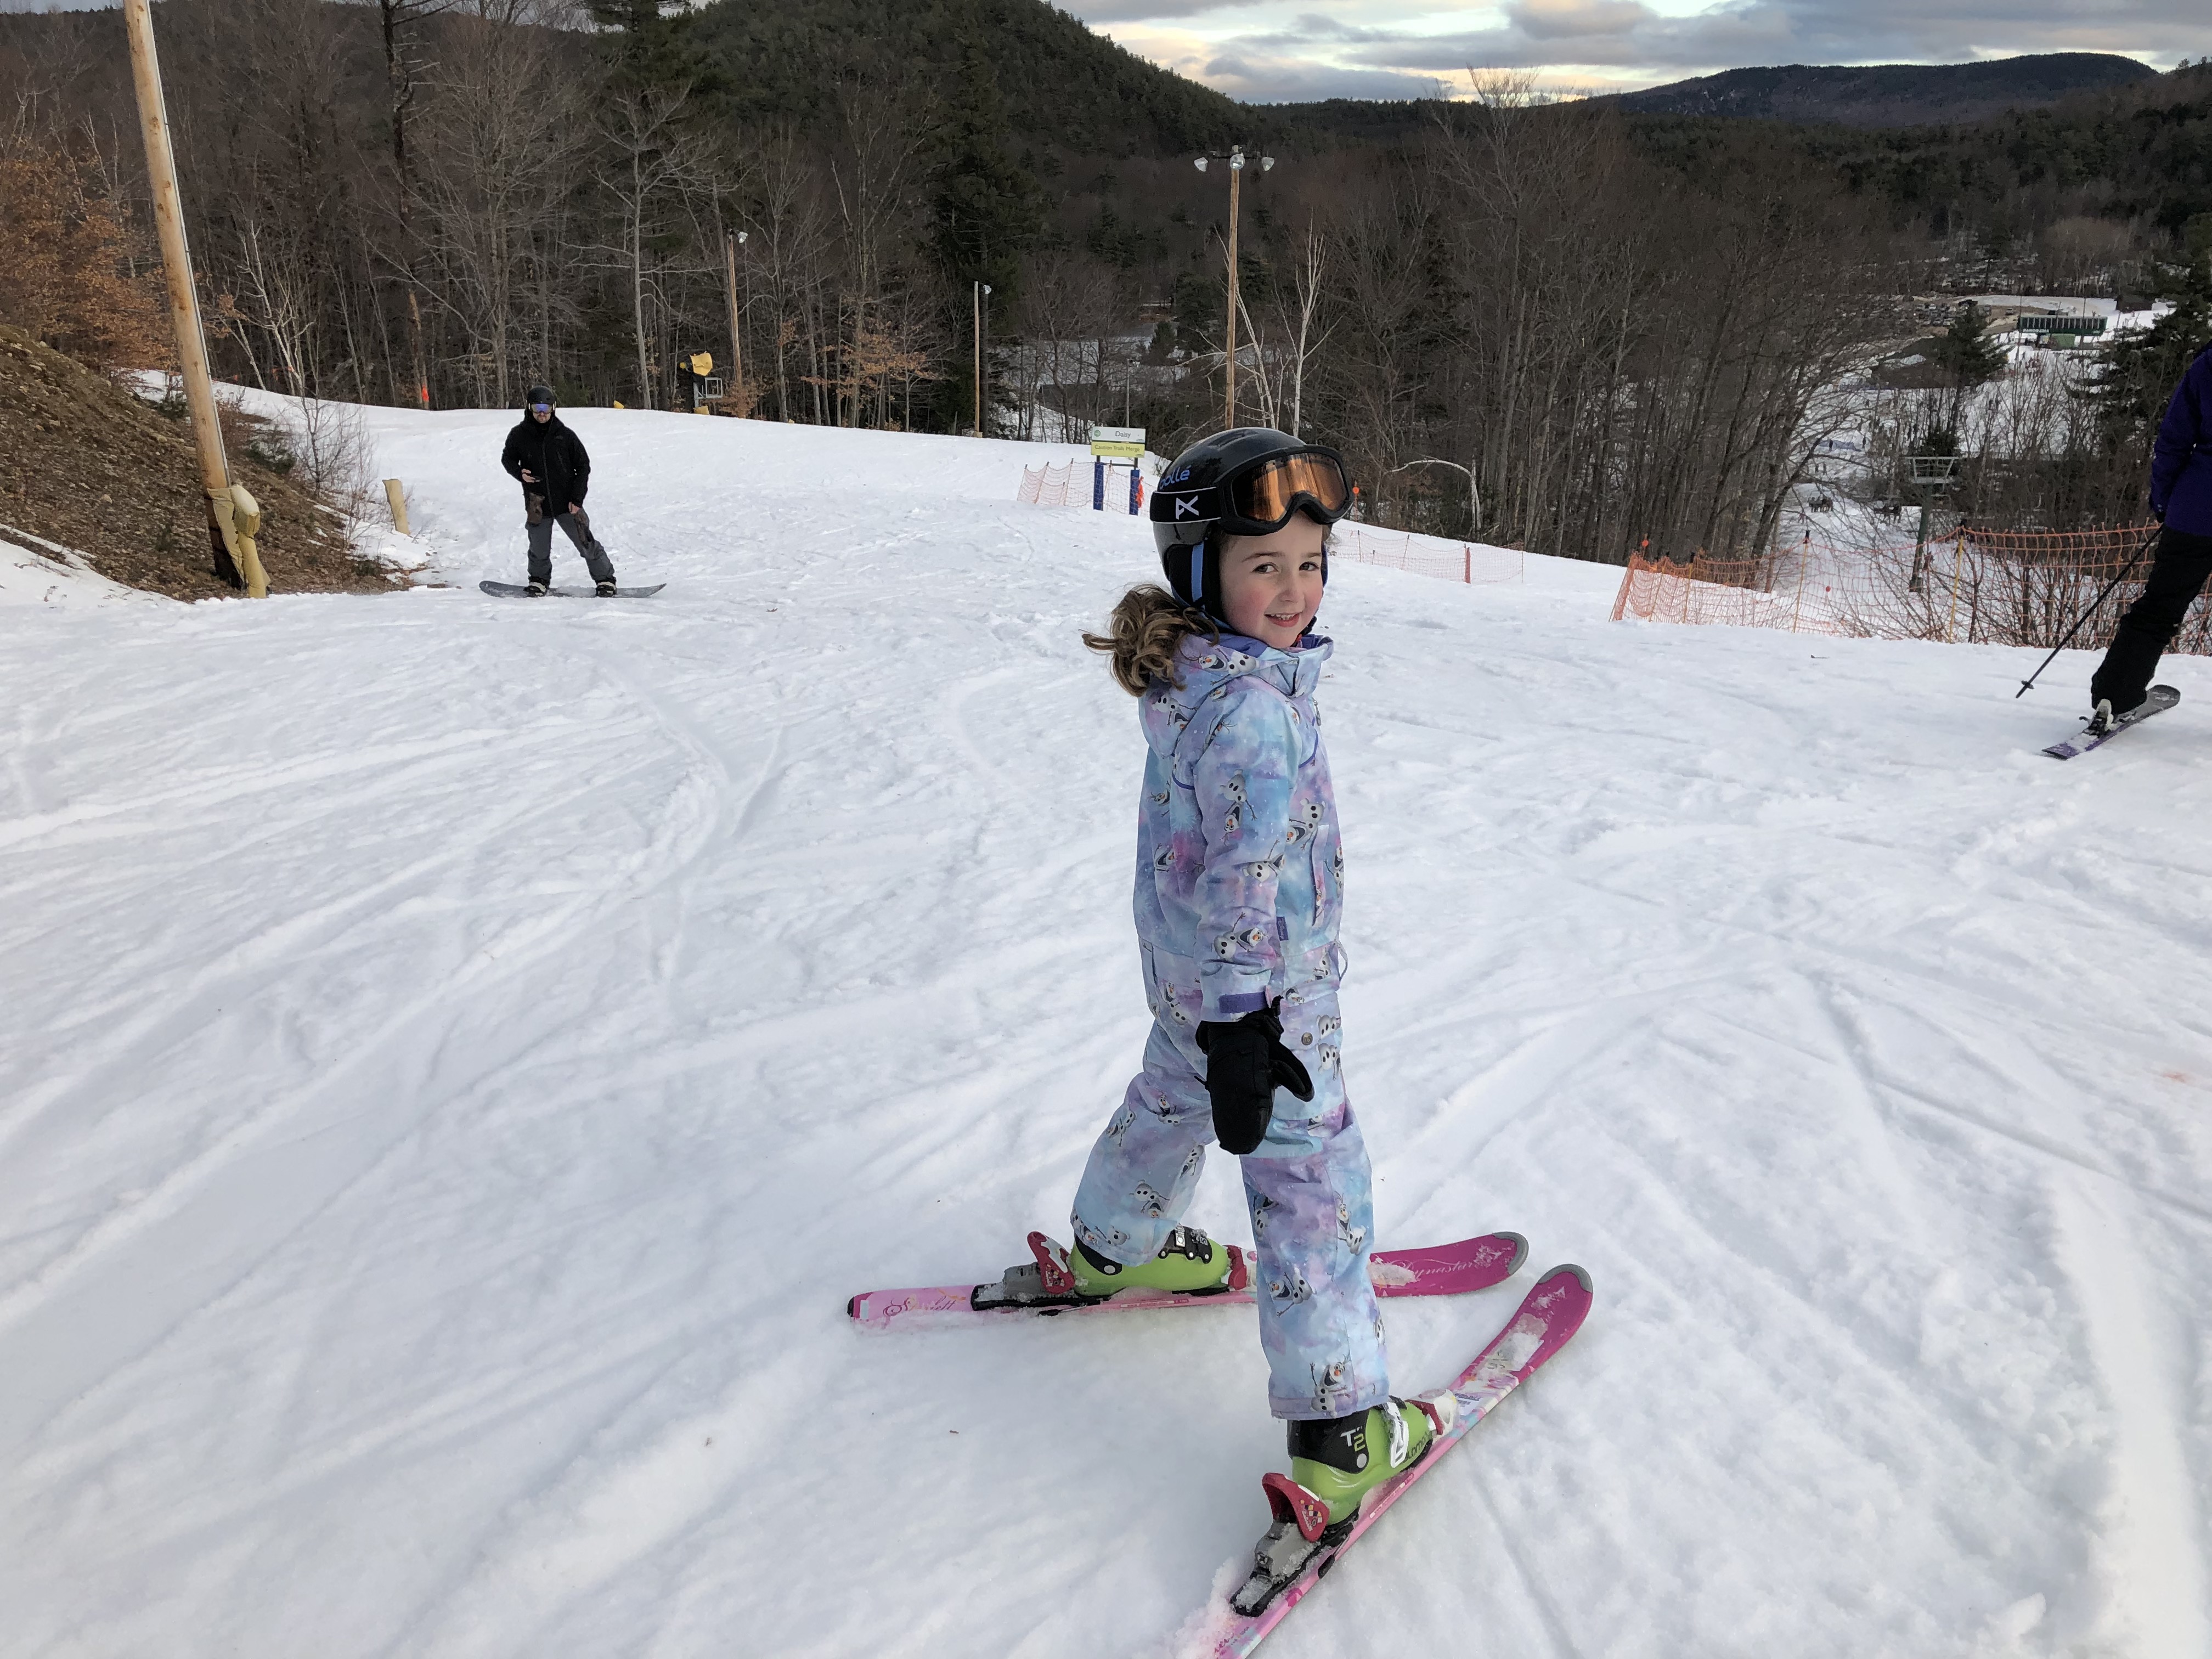 a child on skis on a snowy hill